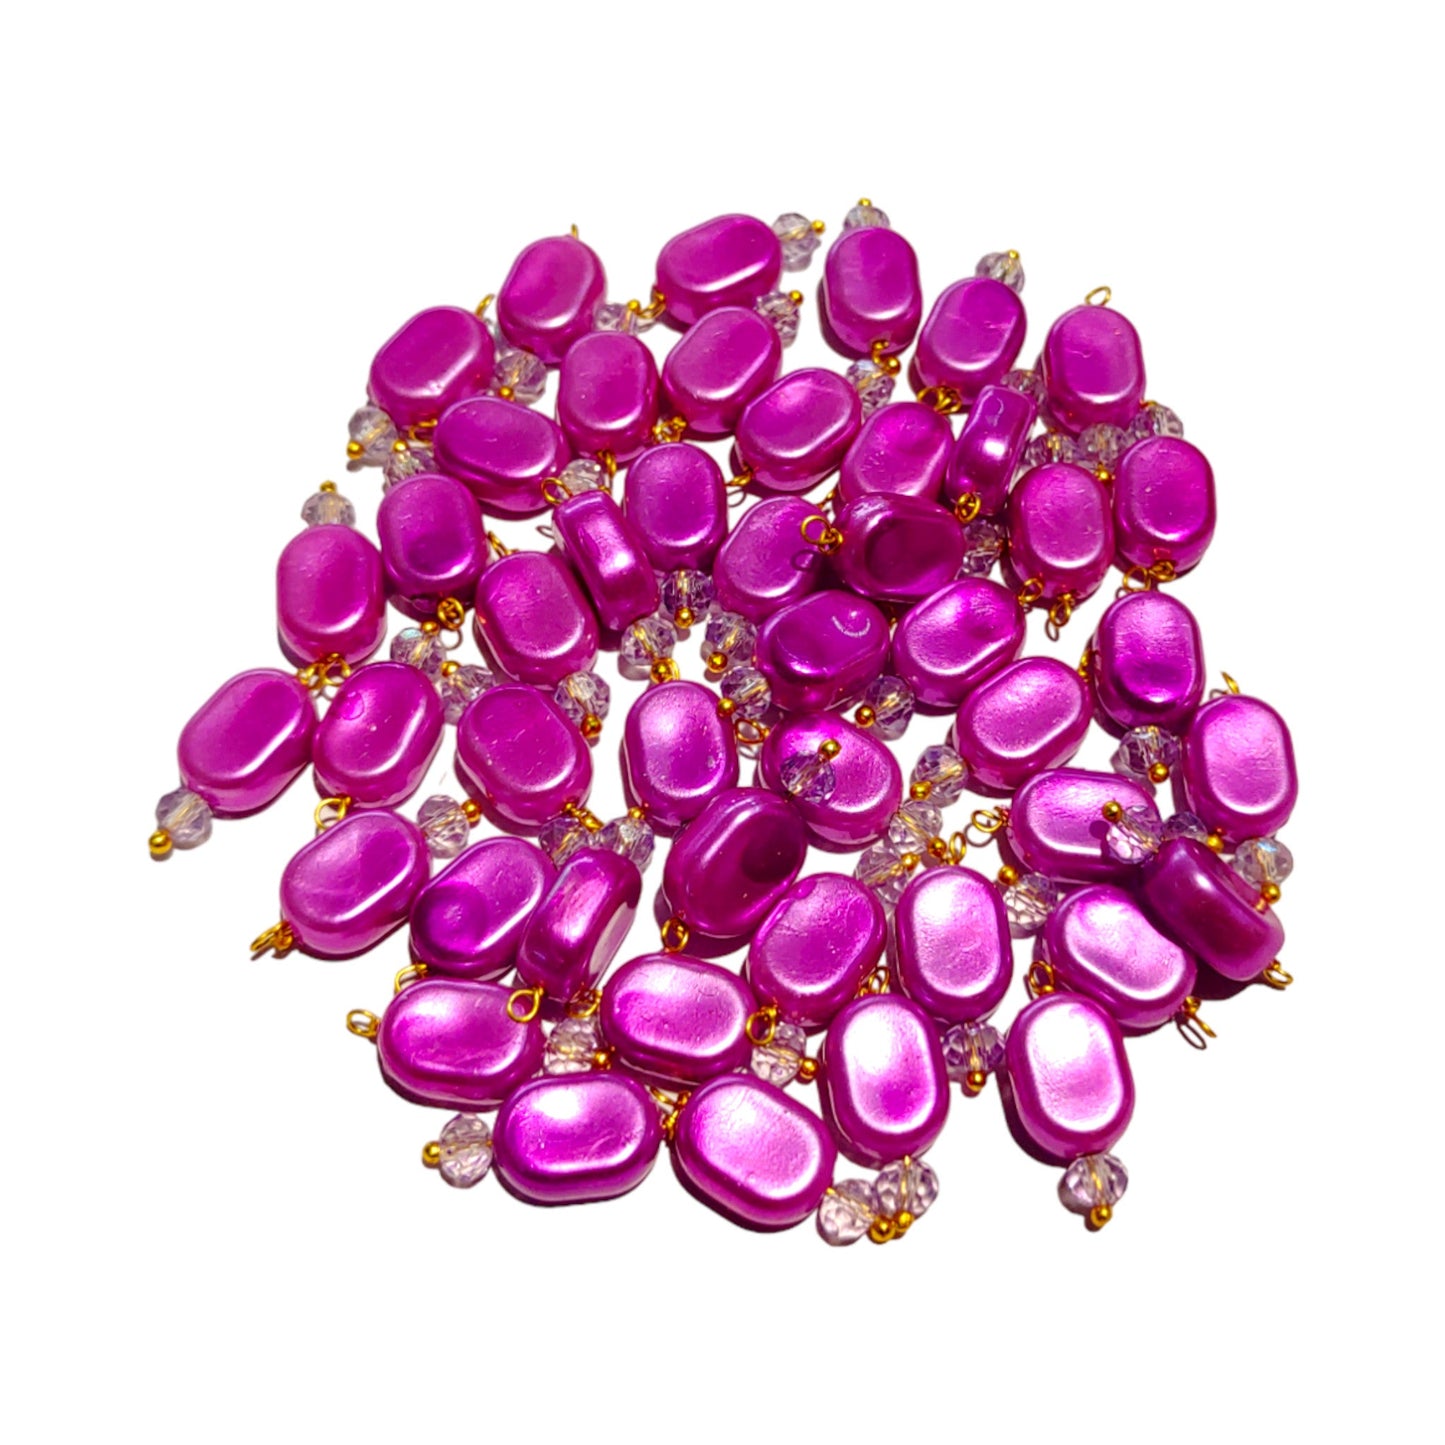 Indian Petals 100Pcs Colored Plastic Bead with Crystal Ball Drop for Craft Décor or Jewelry Making, 8x12mm, Purple